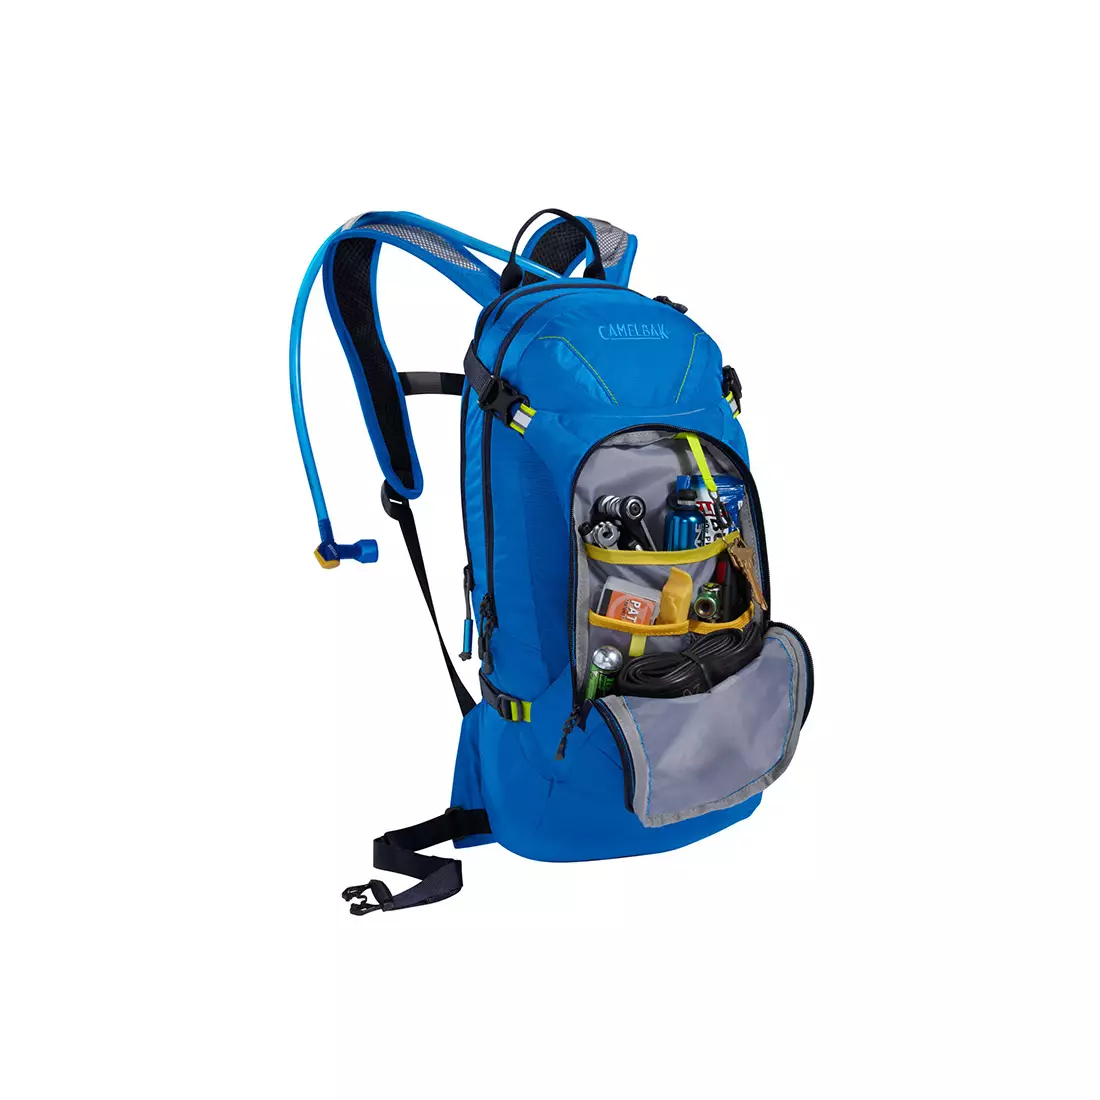 CAMELBAK backpack with water bladder MULE 100 oz / 3L Barbados Cherry INTL 62392-IN SS16